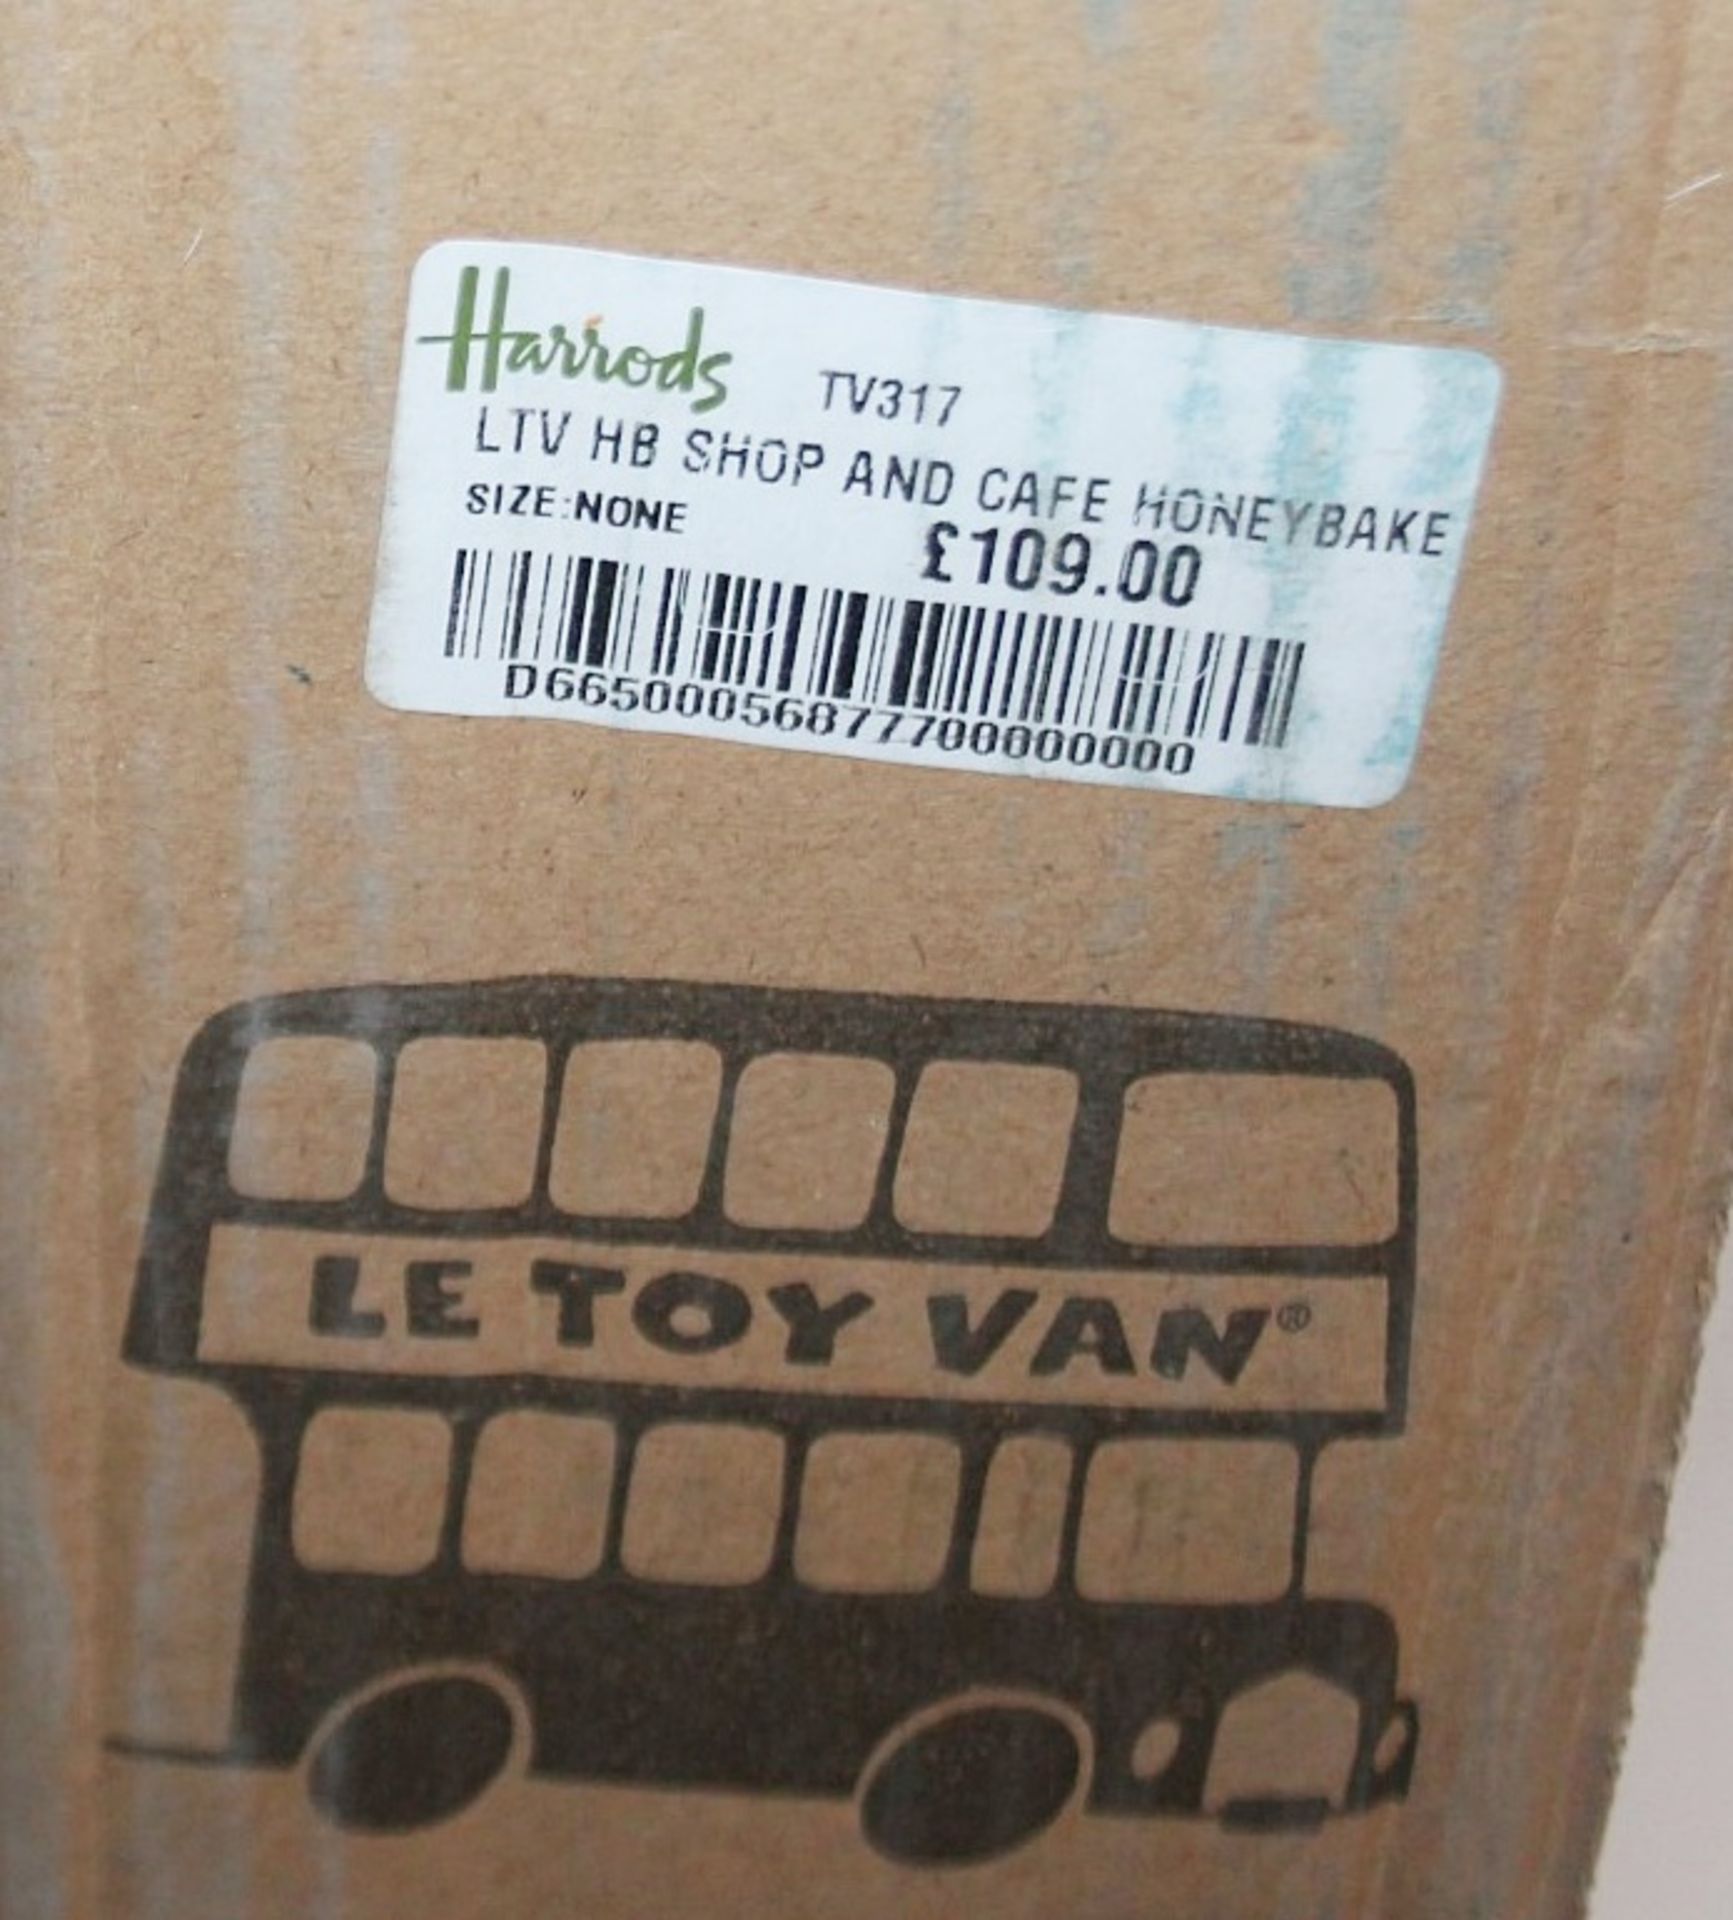 1 x LE TOY VAN Wooden Honeybake Shop and Café - Original Price £109.00 - New & Sealed Boxed - Image 2 of 4